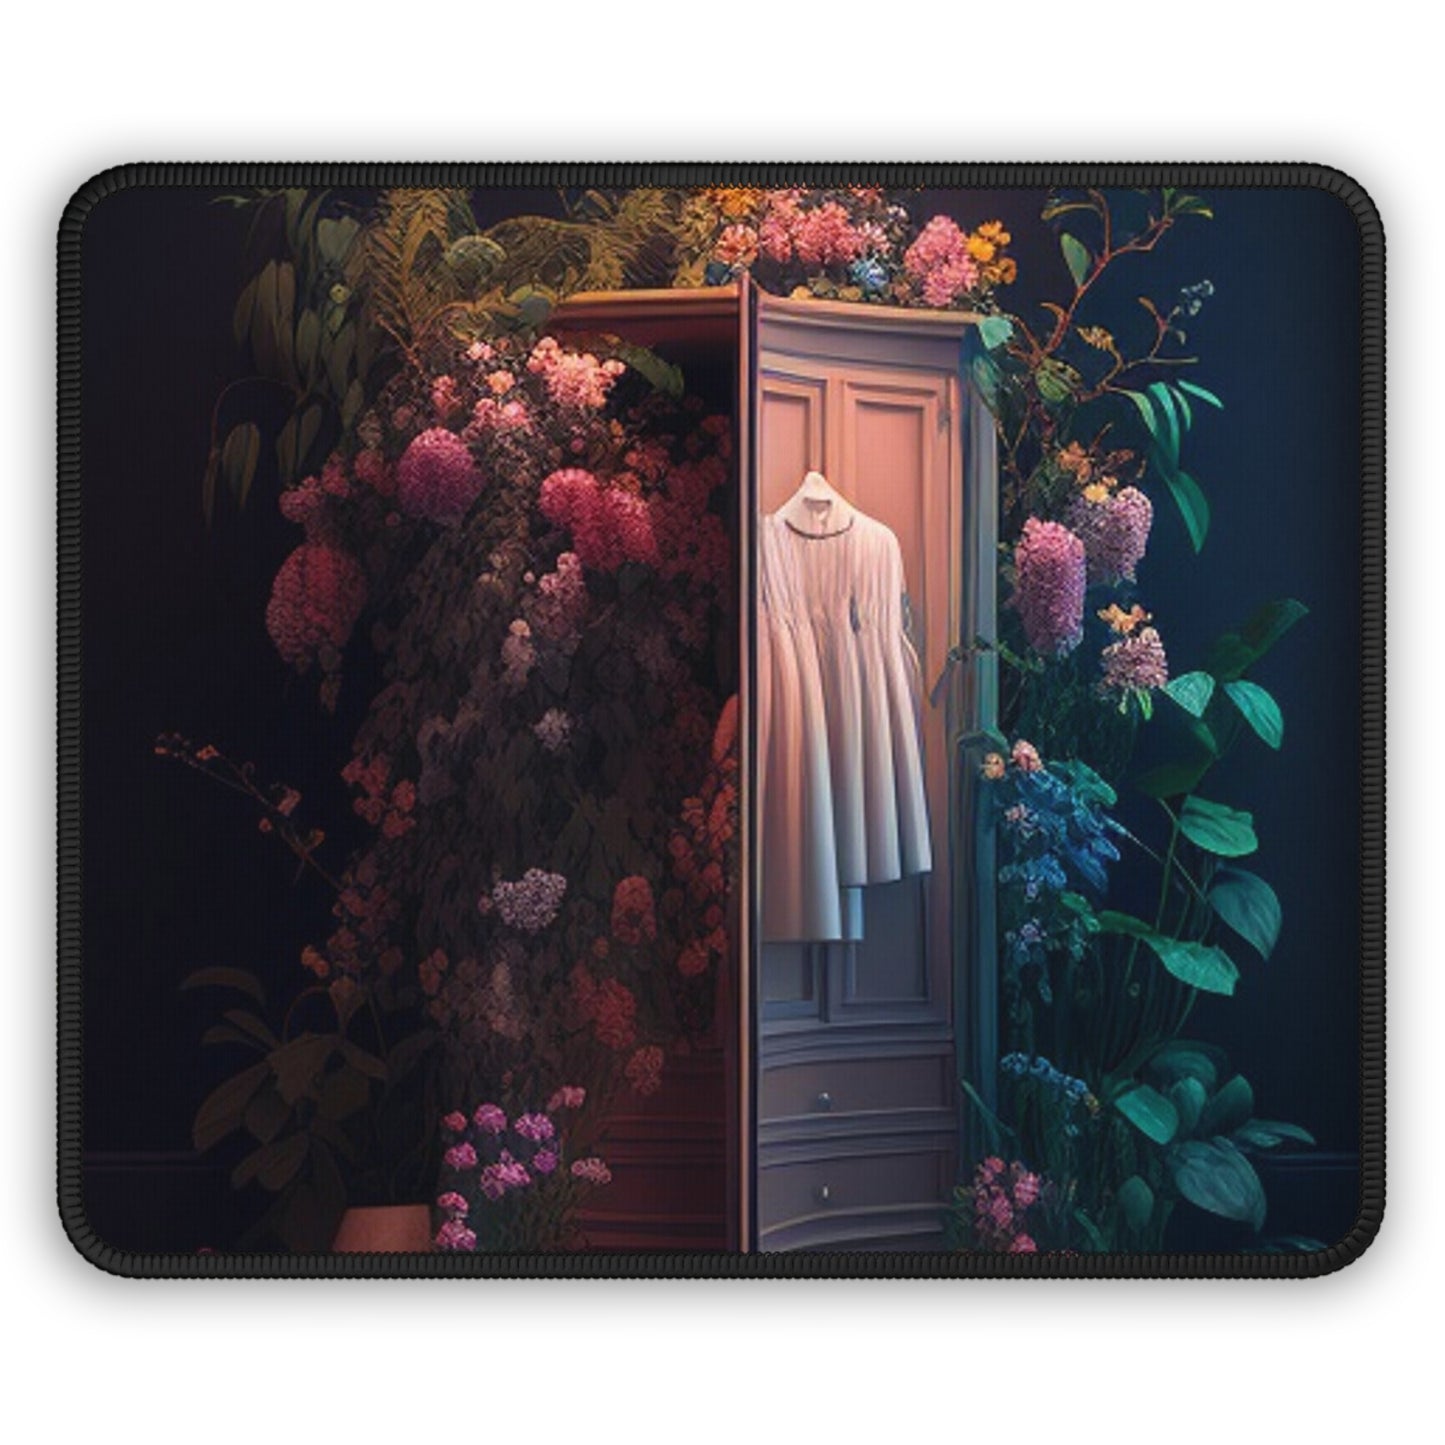 Gaming Mouse Pad  A Wardrobe Surrounded by Flowers 3